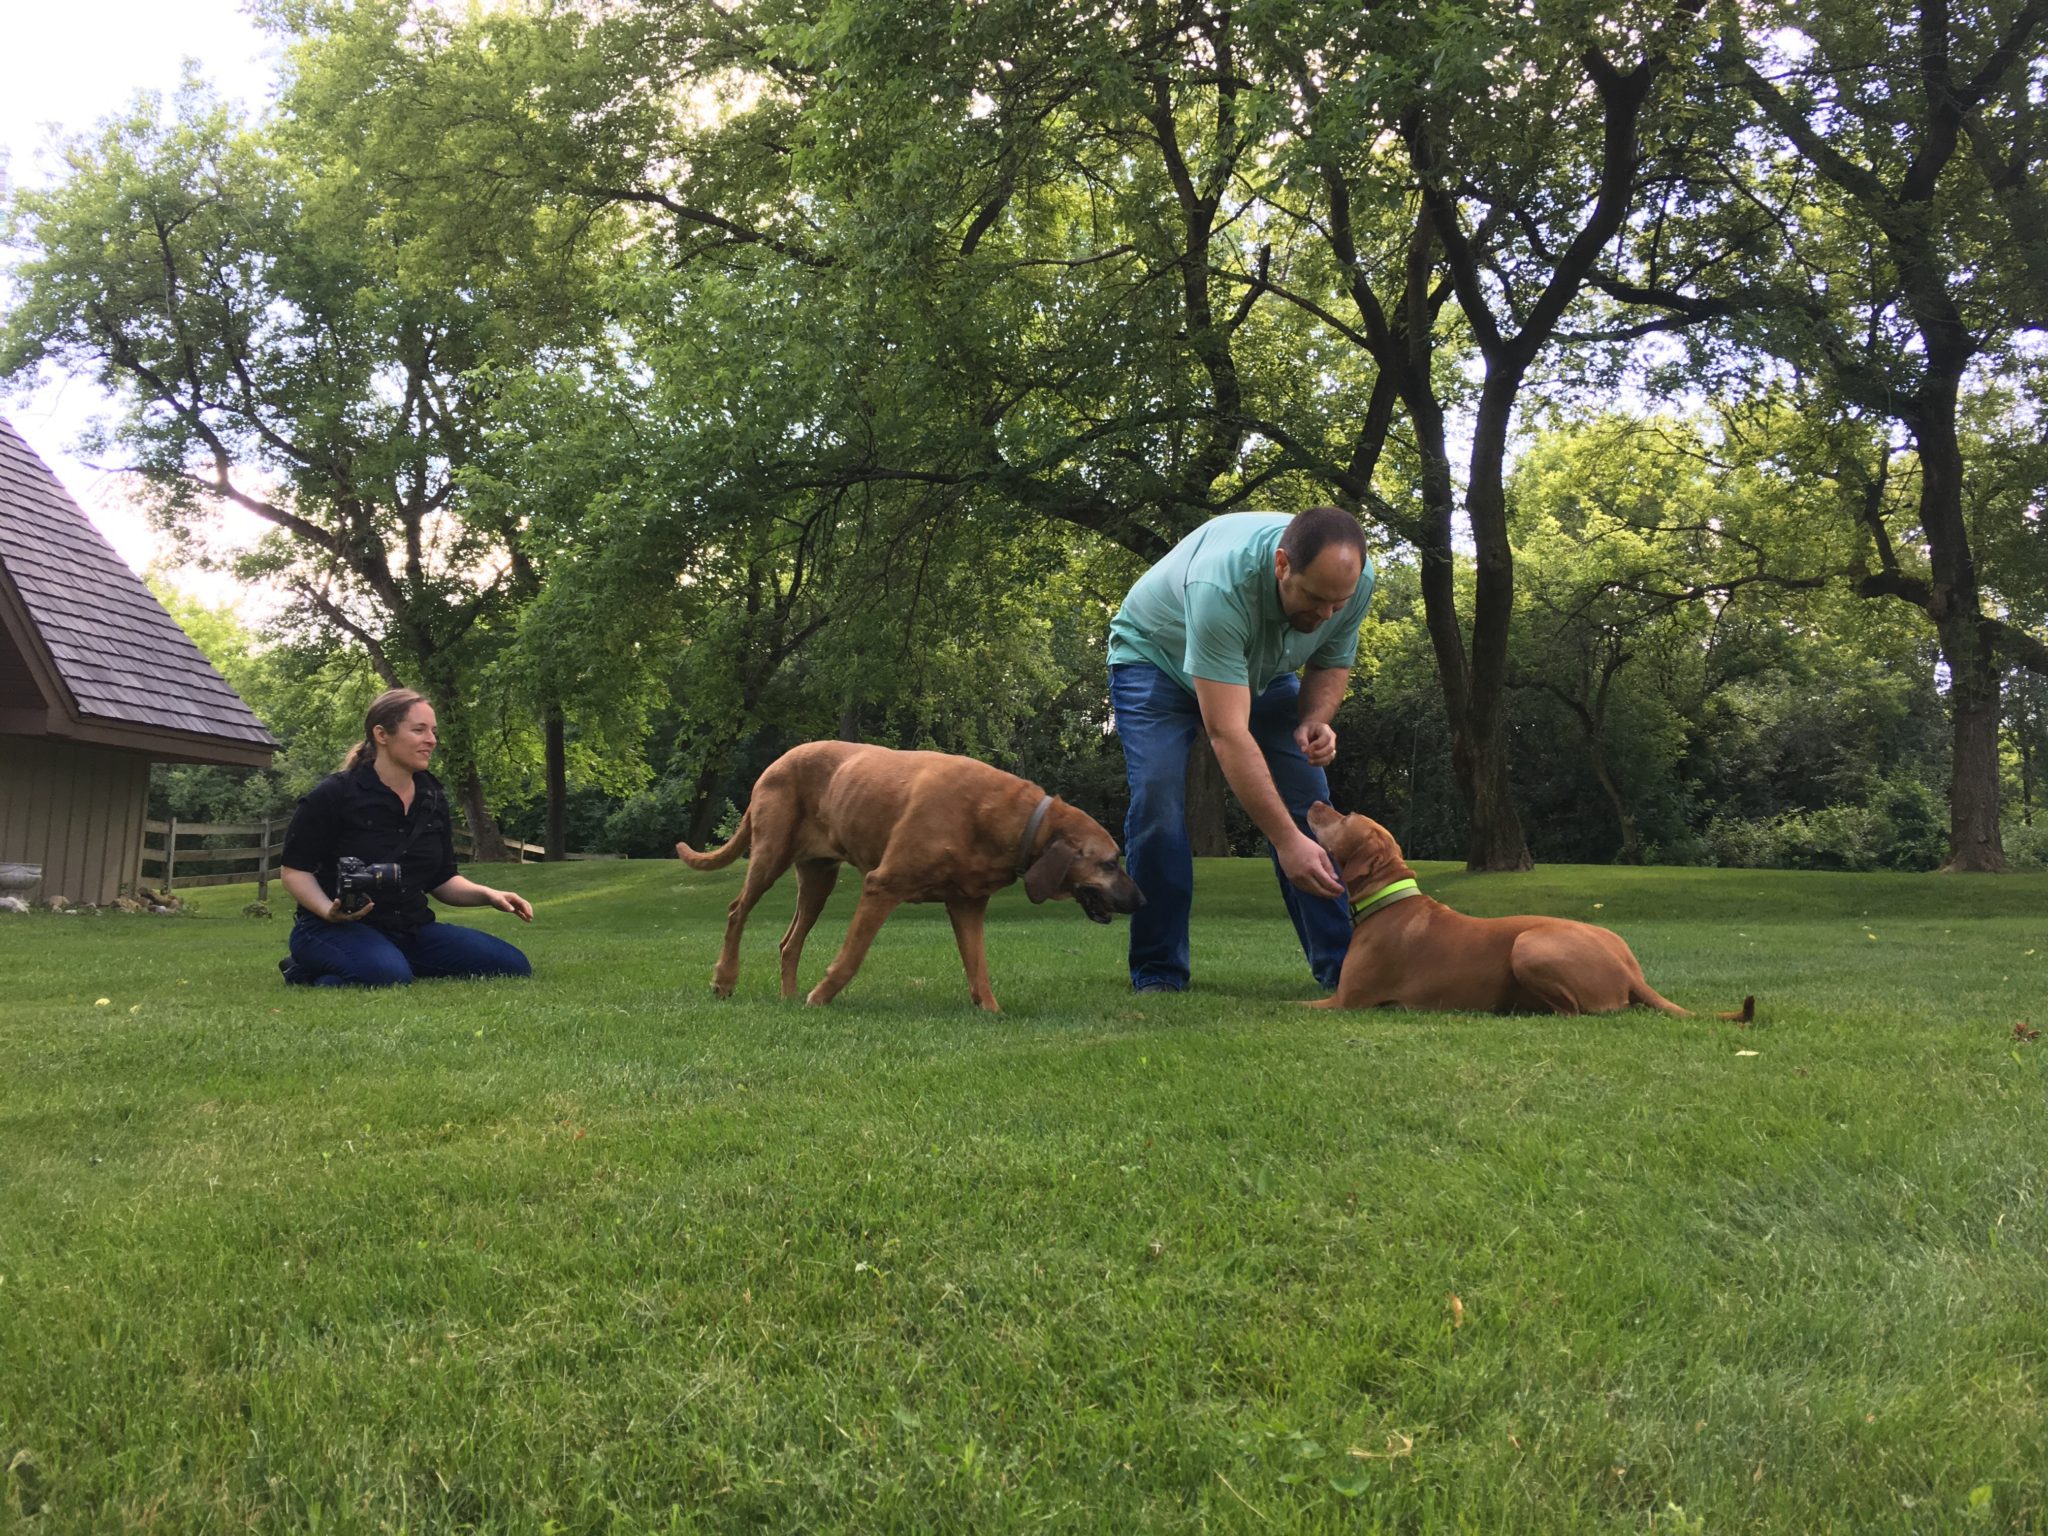 two large brown dogs eating treats from a man and a woman ready to take photos